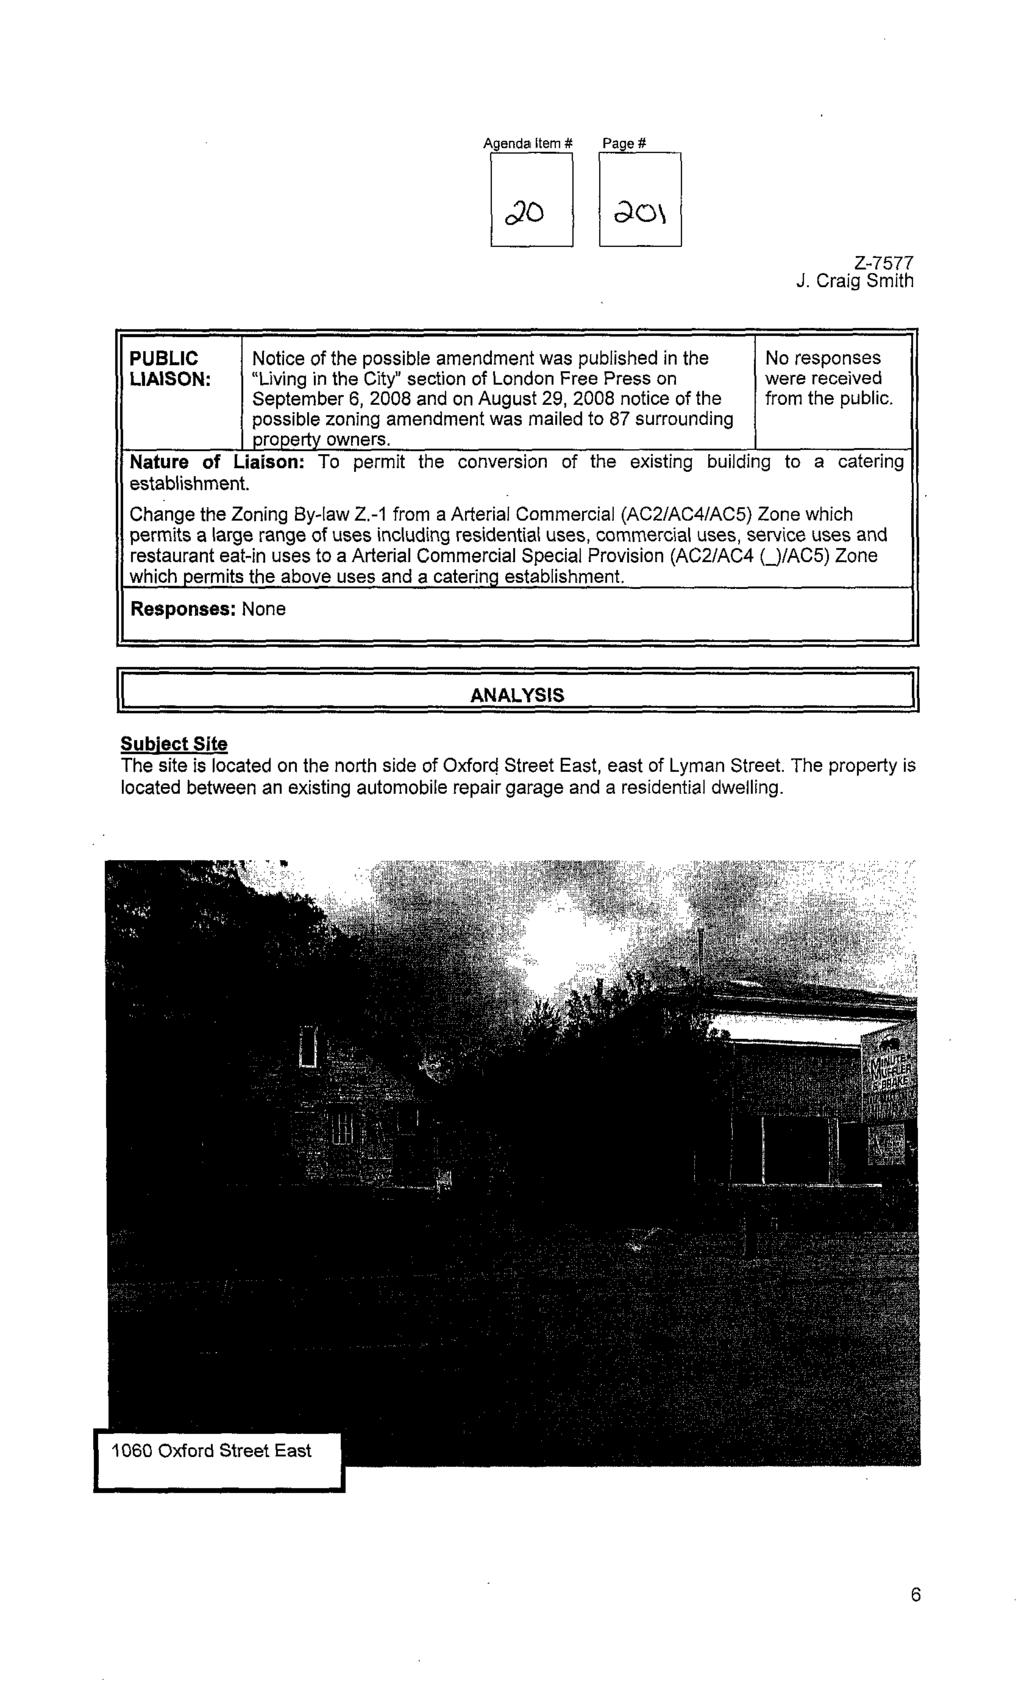 ~ ~~ ~~~~~ ~~~~ ~~~~ ~~ Agenda r-lm item # Page # PUBLIC LIAISON: Notice of the possible amendment was published in the "Living in the City" section of London Free Press on September 6, 2008 and on